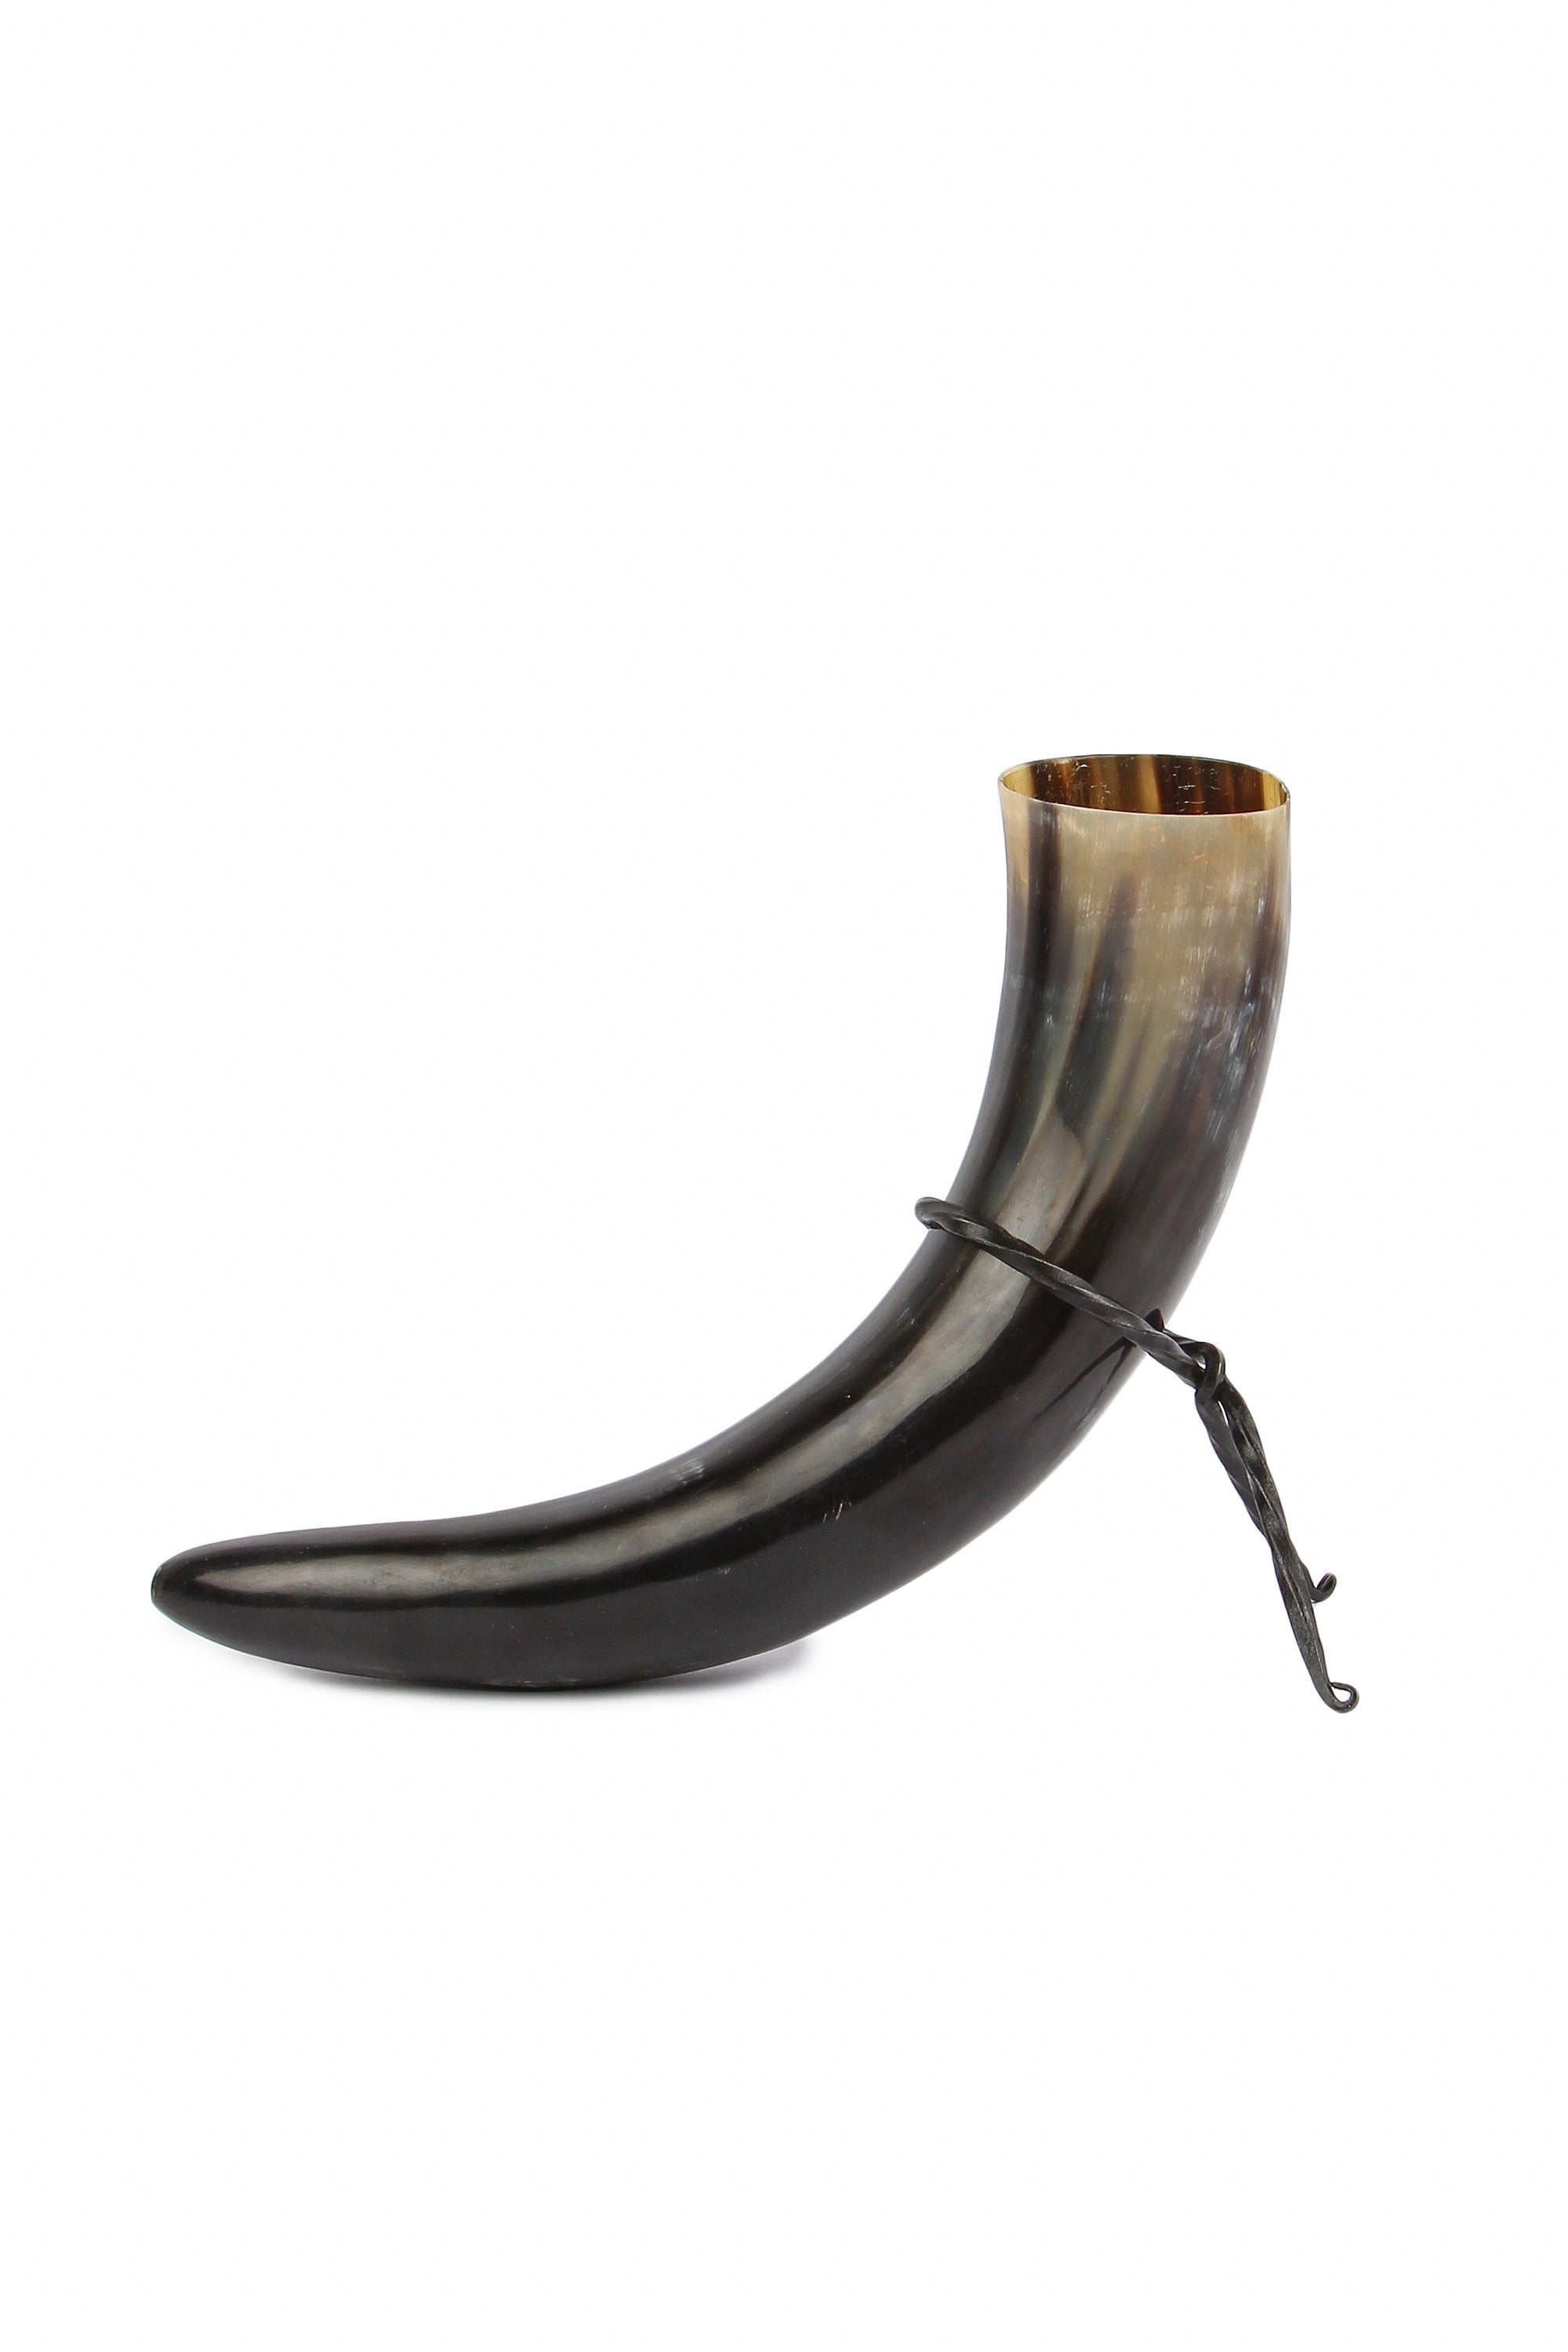 Horn stand 80 mm